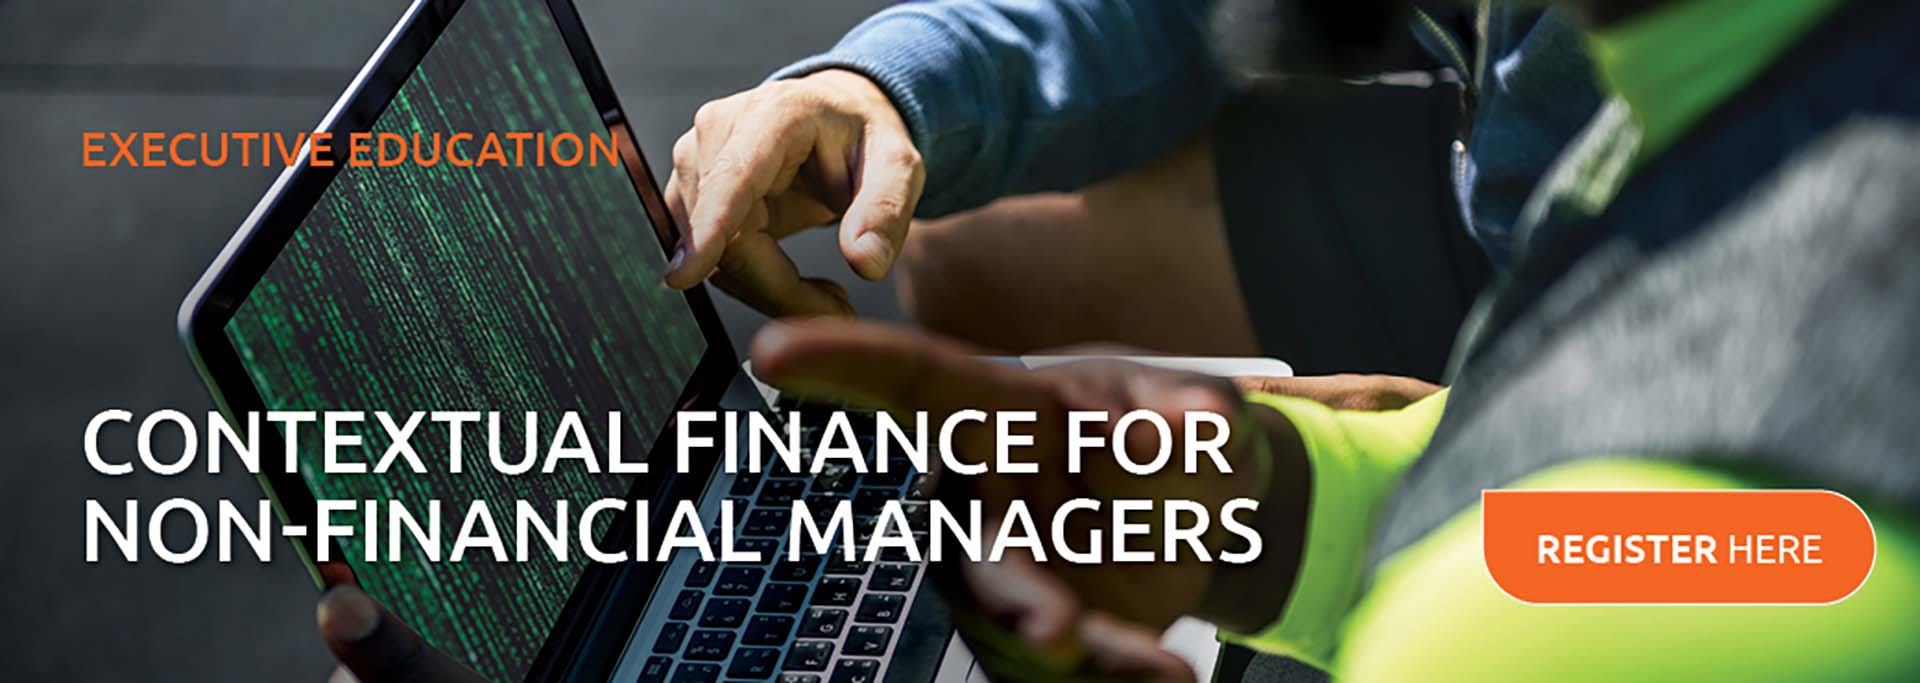 Contextual Finance For Non-Financial Managers